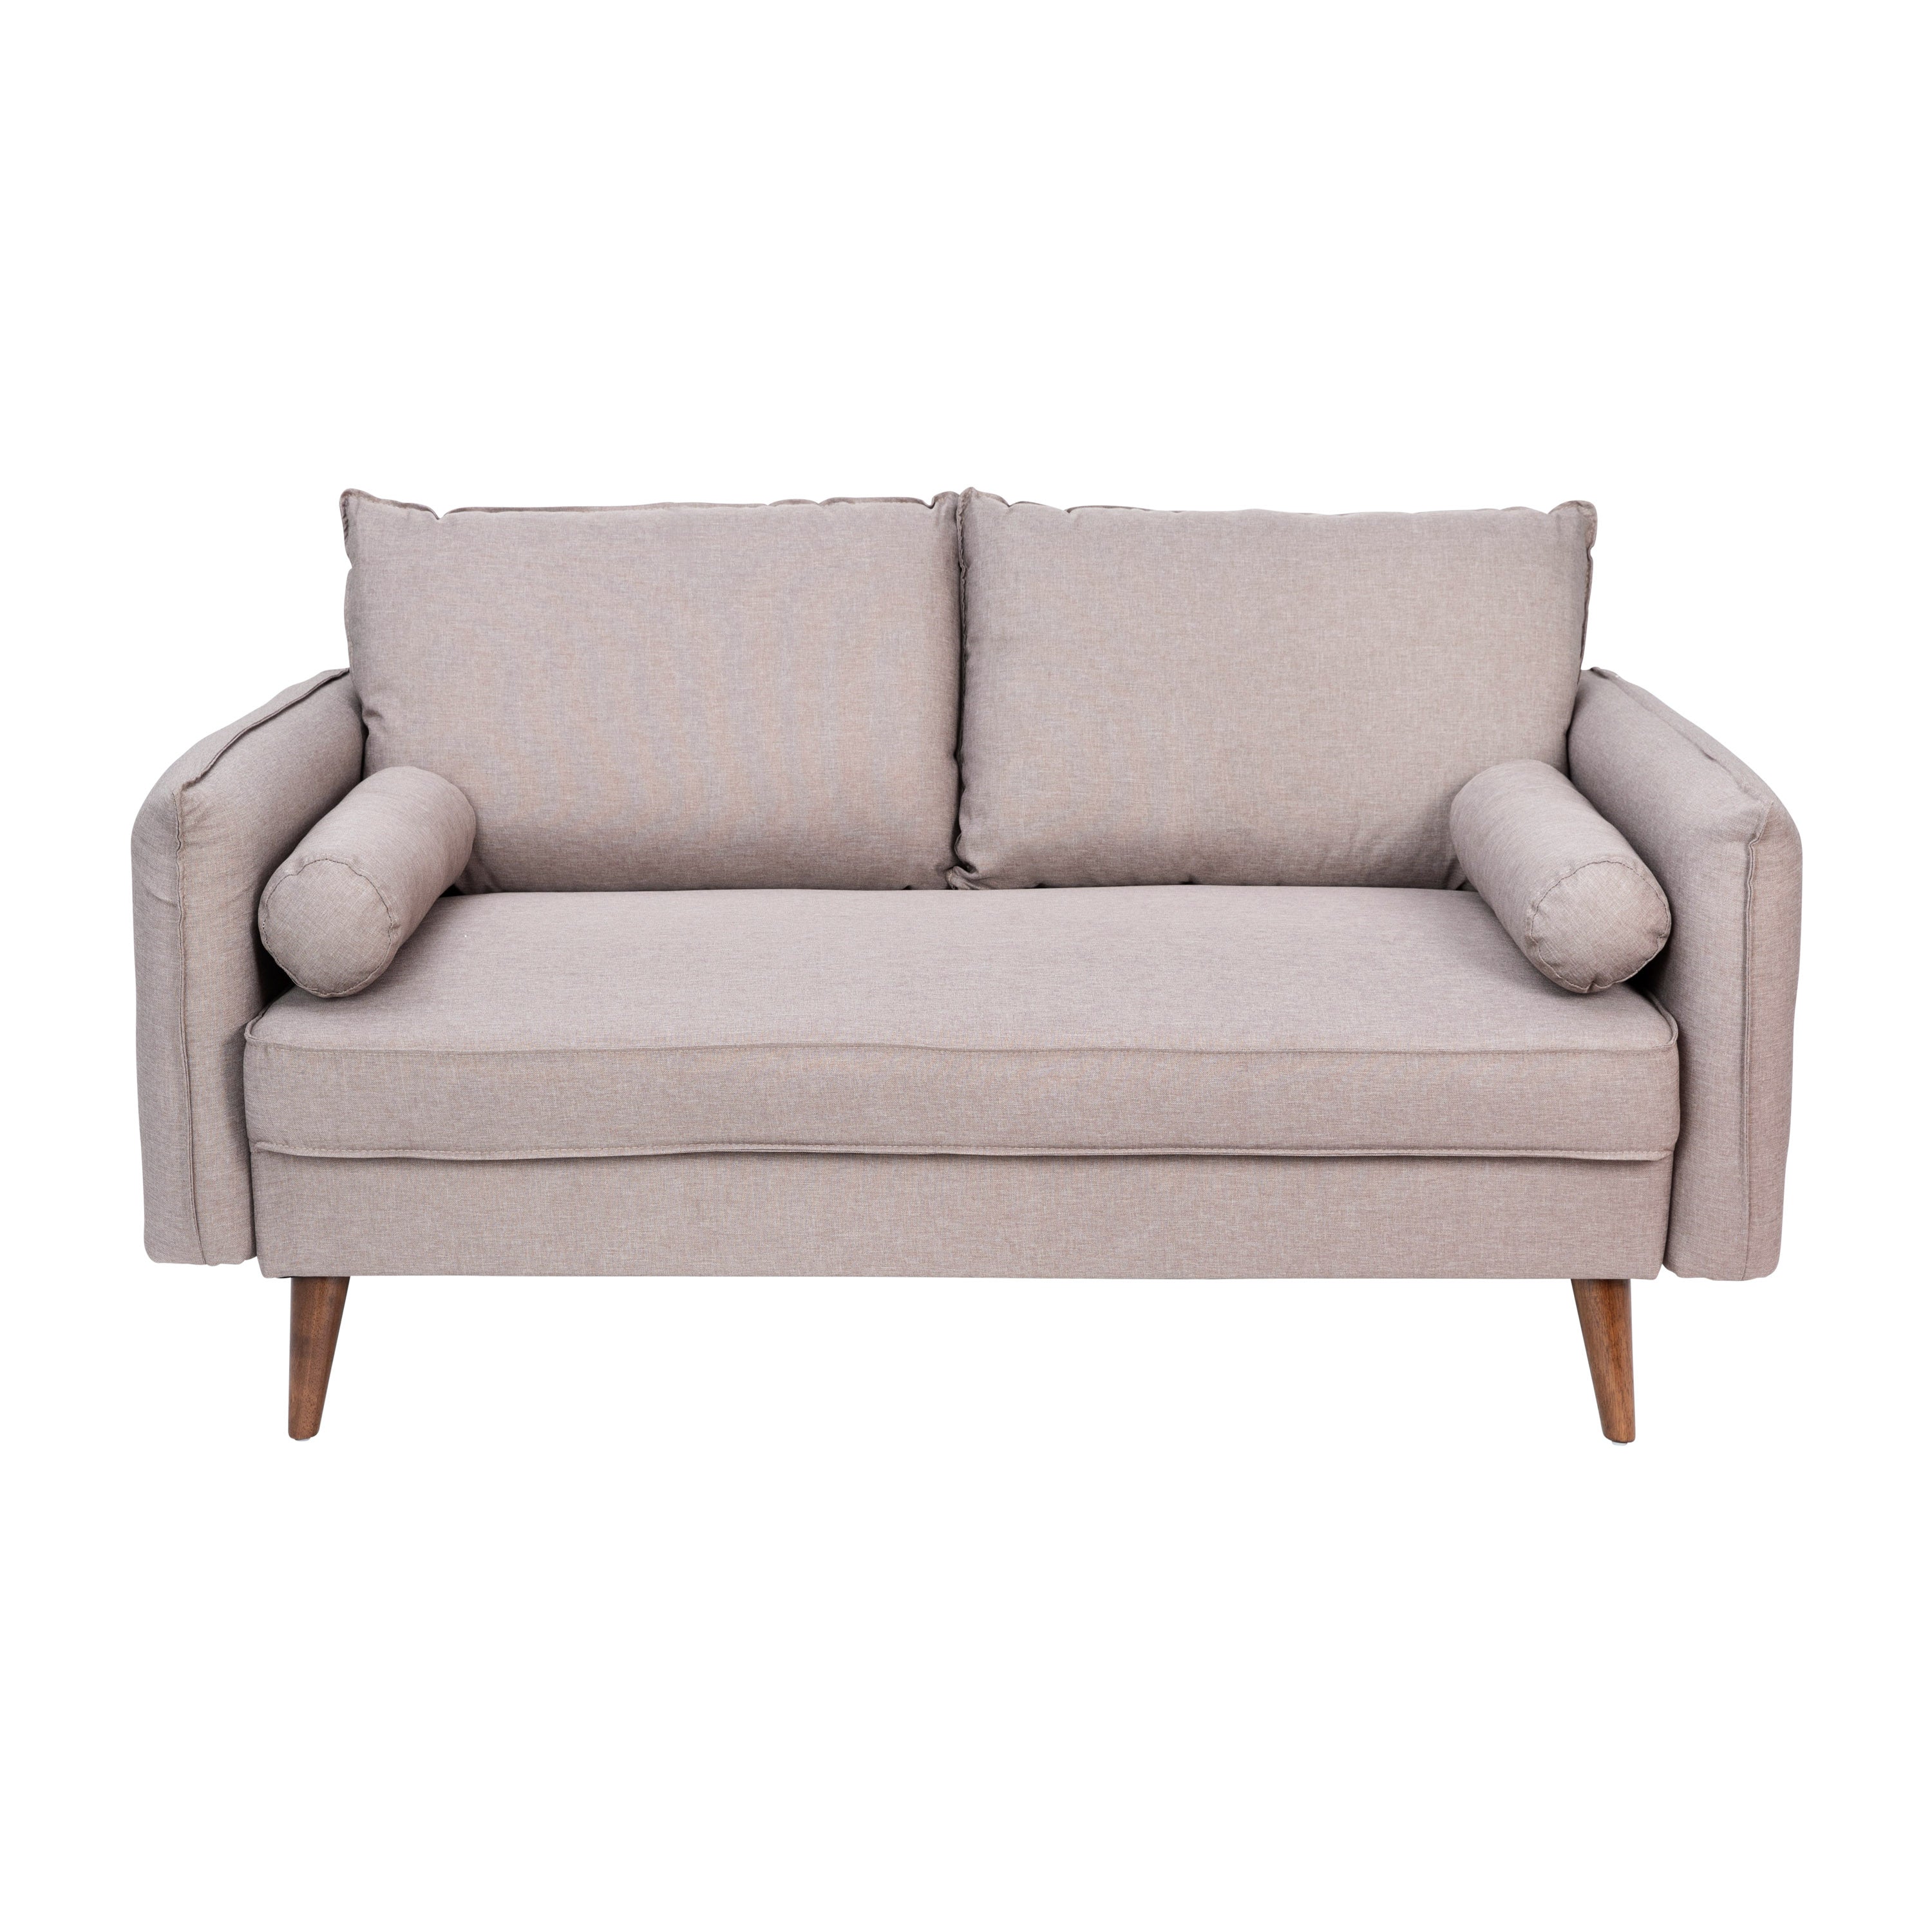 Evie Mid-Century Modern Loveseat Sofa with Fabric Upholstery & Solid Wood Legs-Loveseat-Flash Furniture-Wall2Wall Furnishings